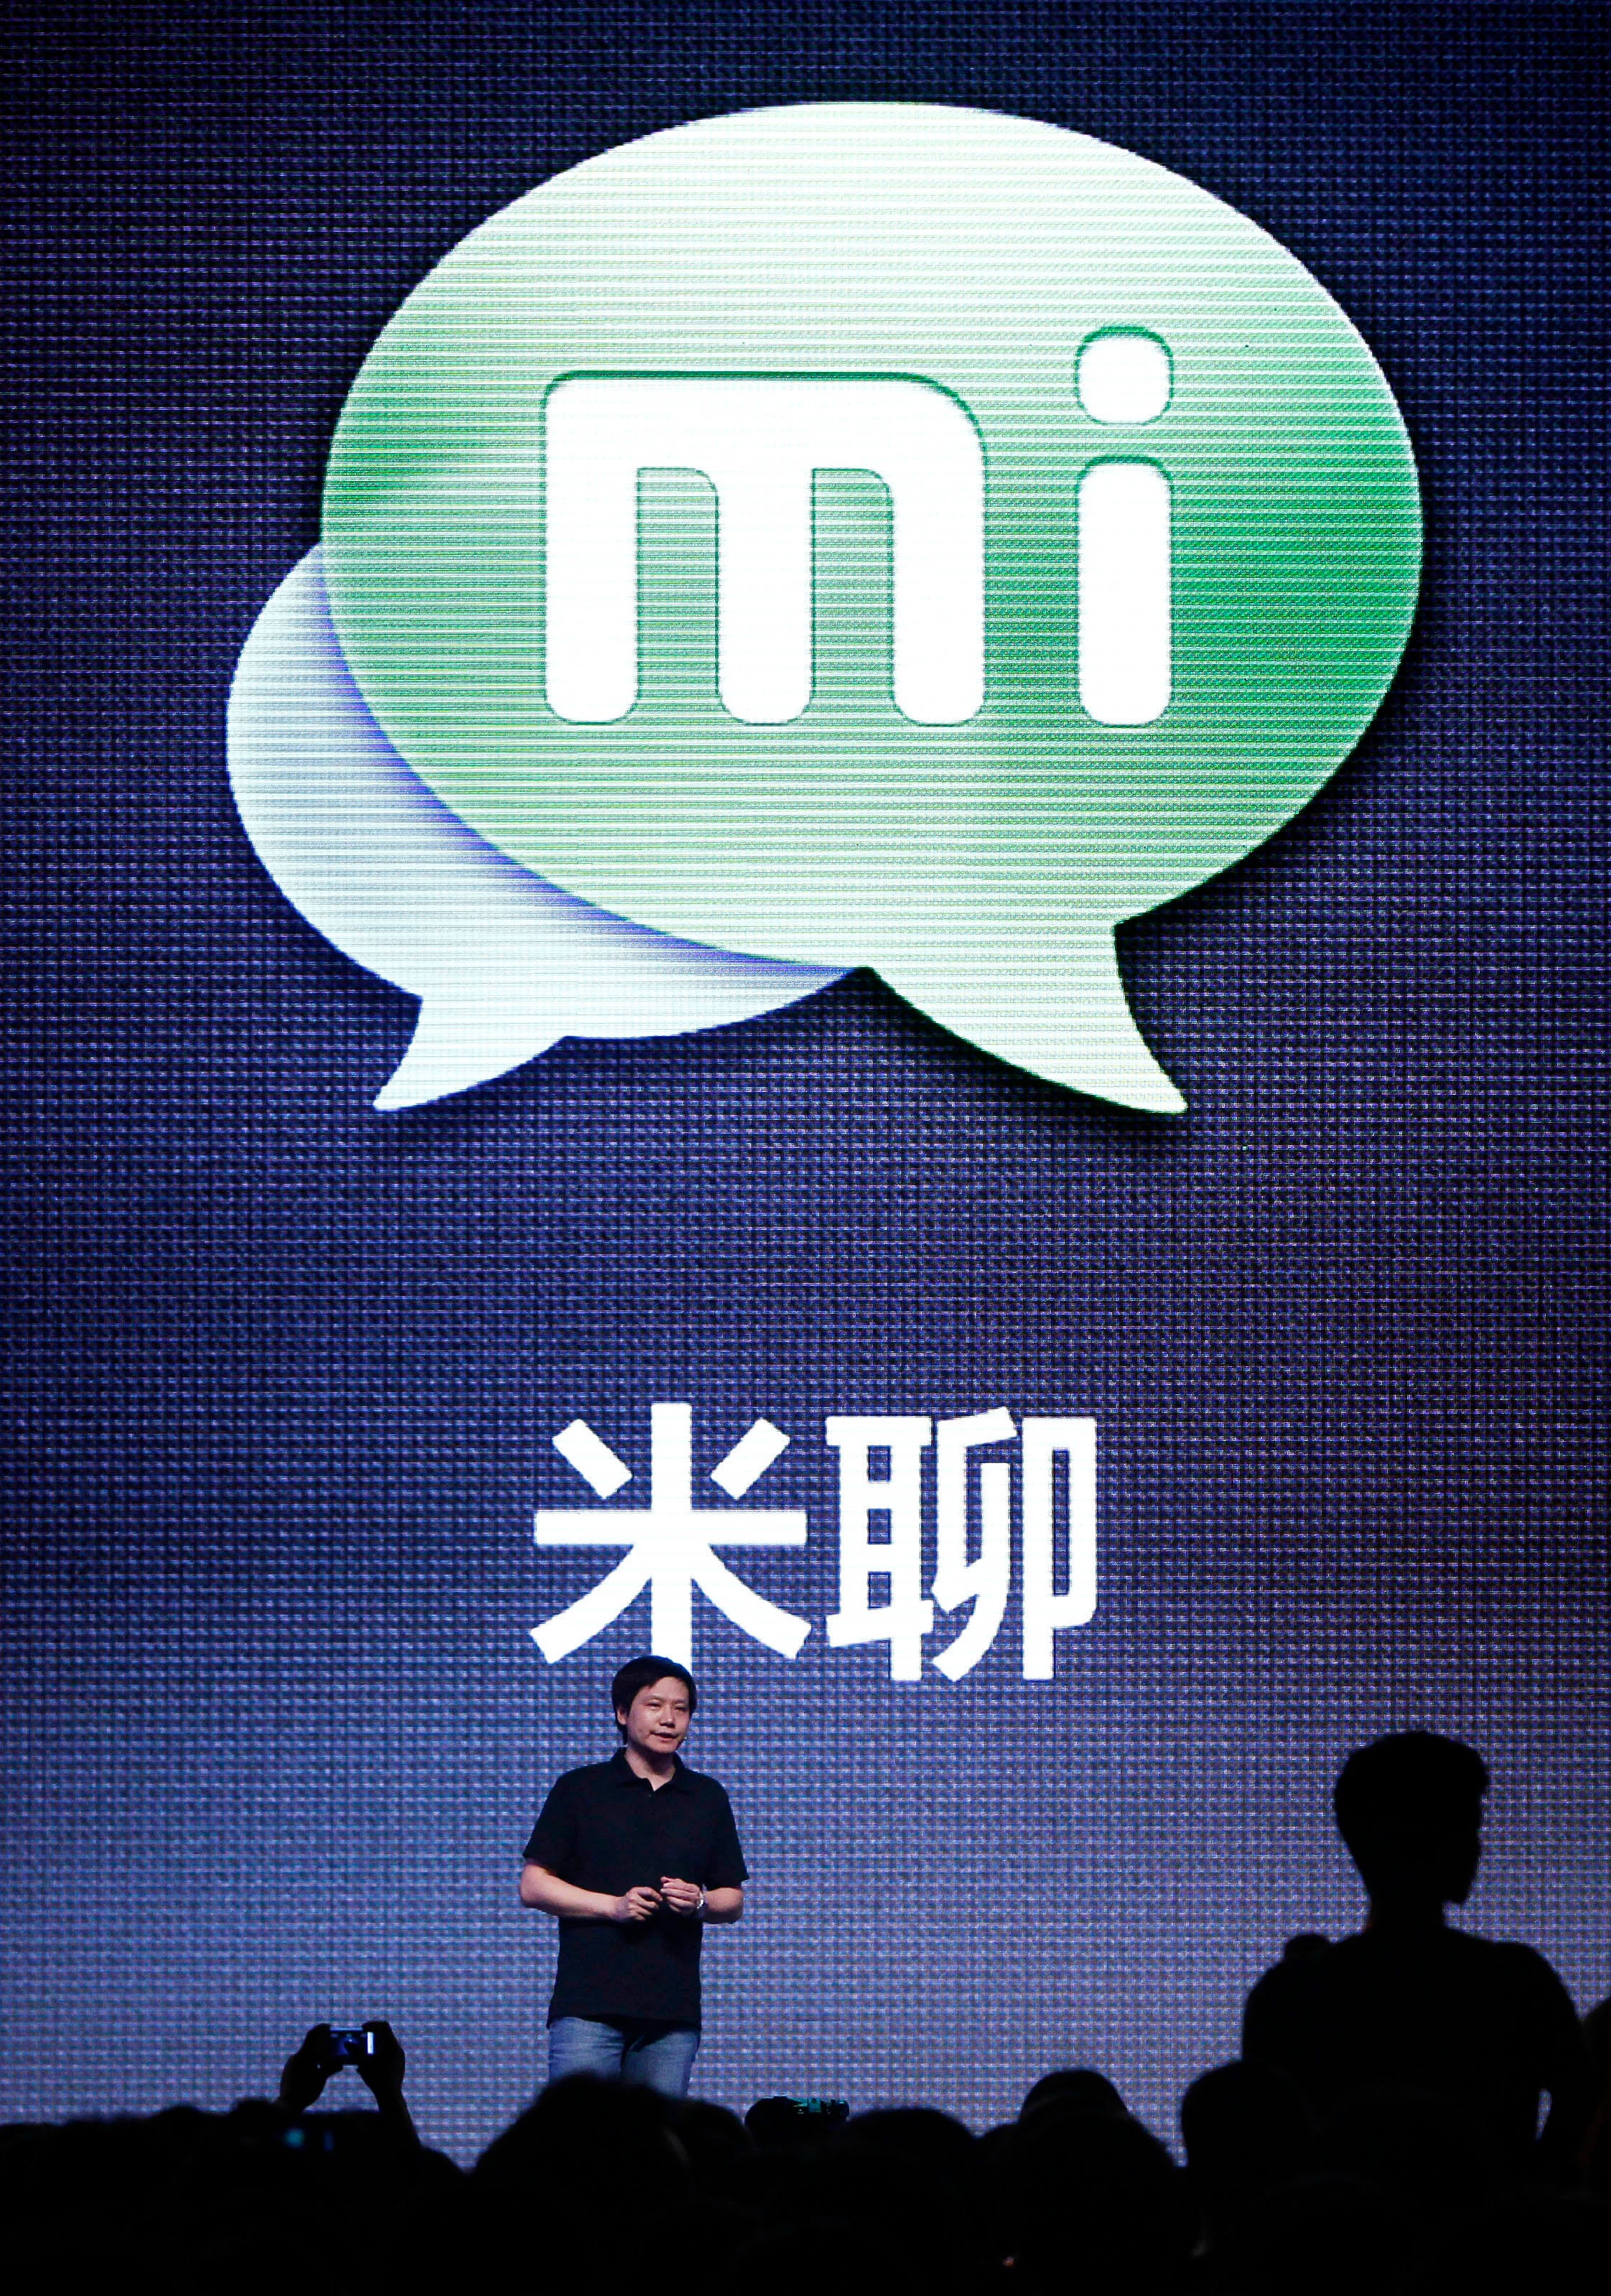 Lei Jun, founder and CEO of China's mobile company Xiaomi, speaks at a launch ceremony of Xiaomi Phone 2 in Beijing August 16, 2012.